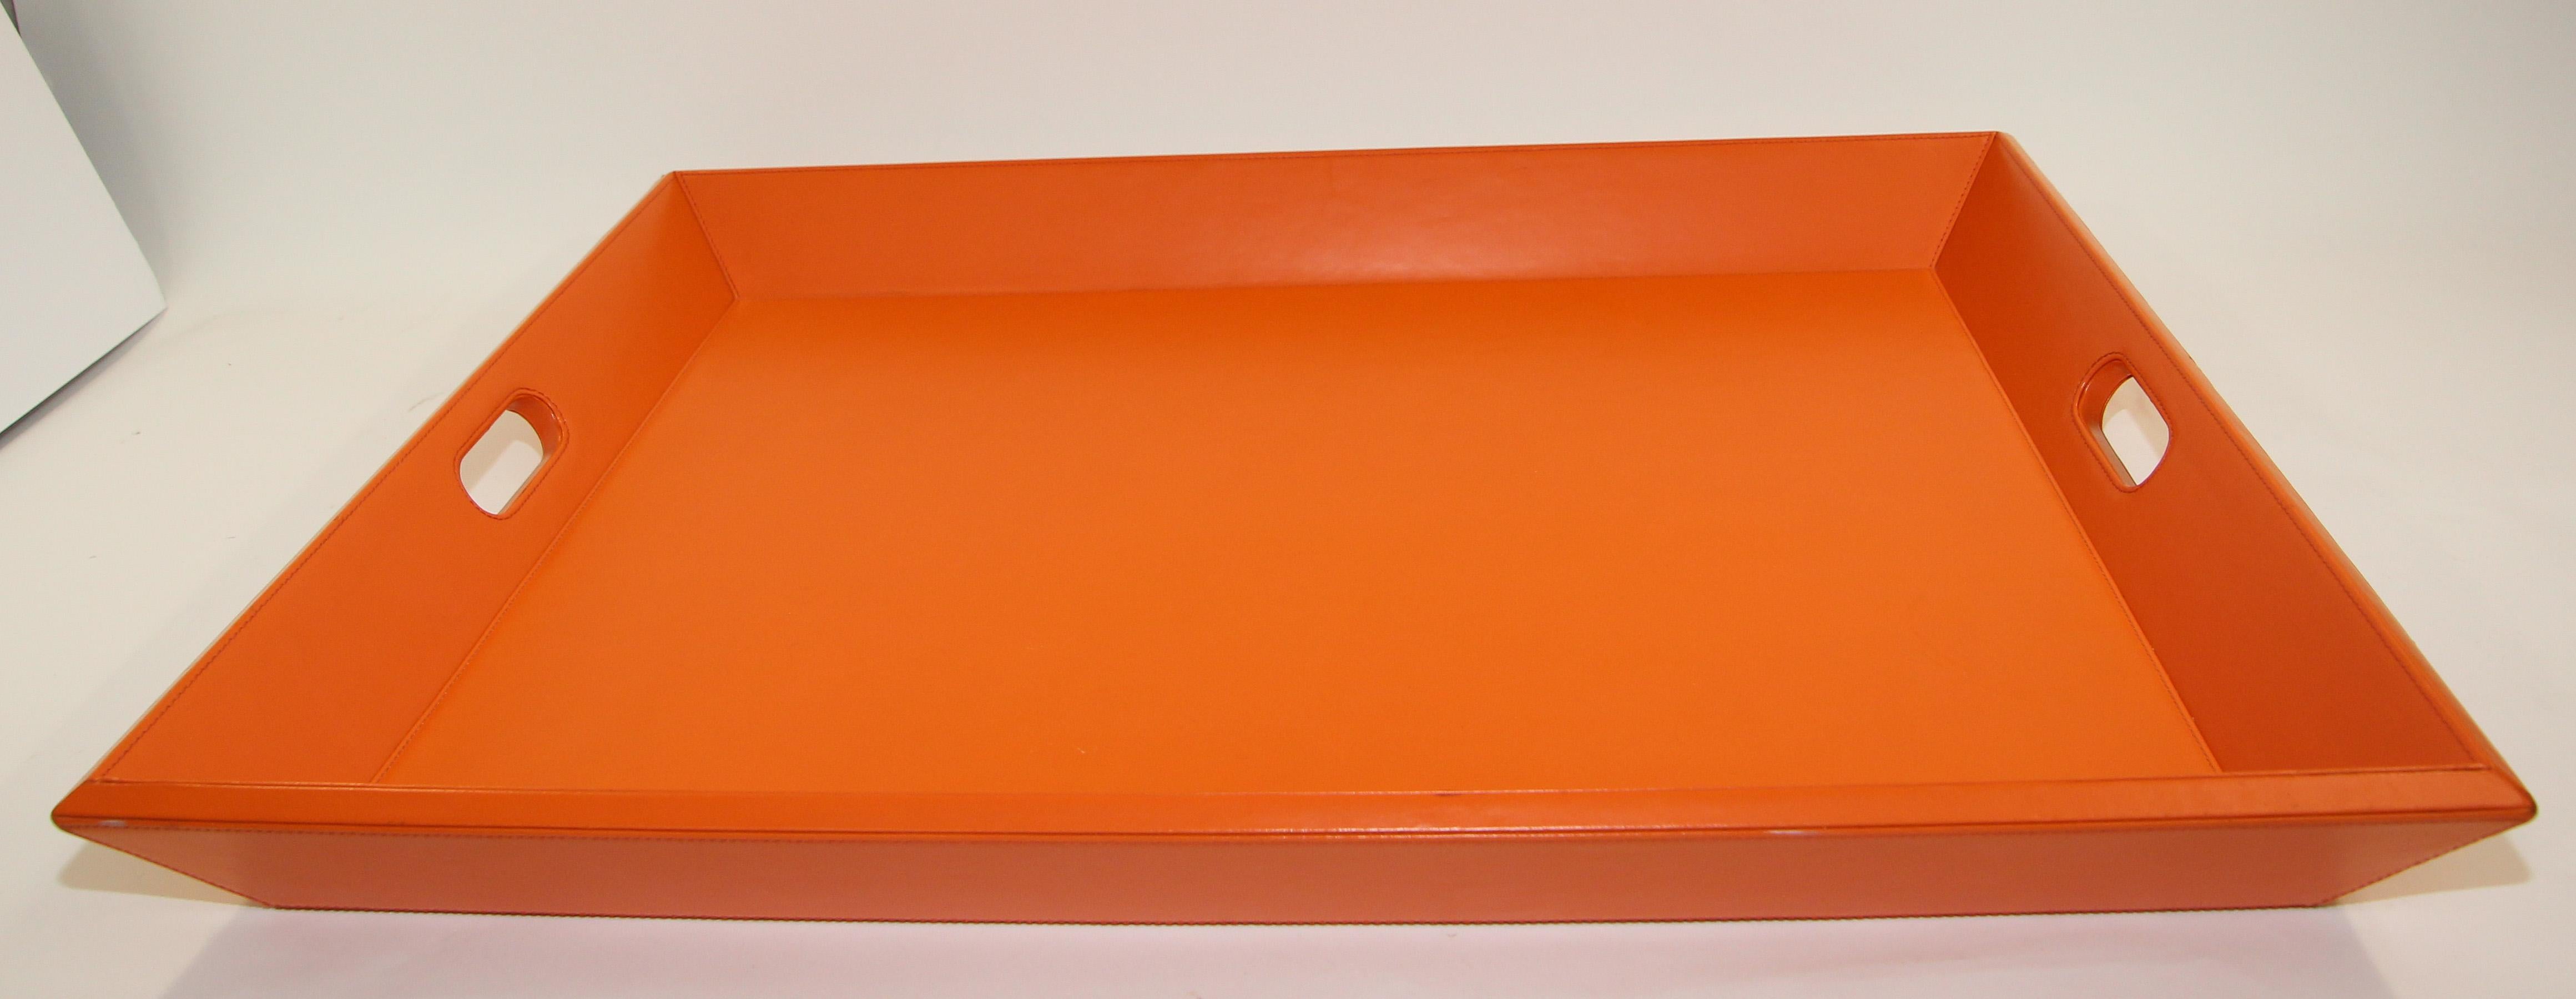 Large Vintage Orange Tray with Handles by Williams Sonoma Home 4